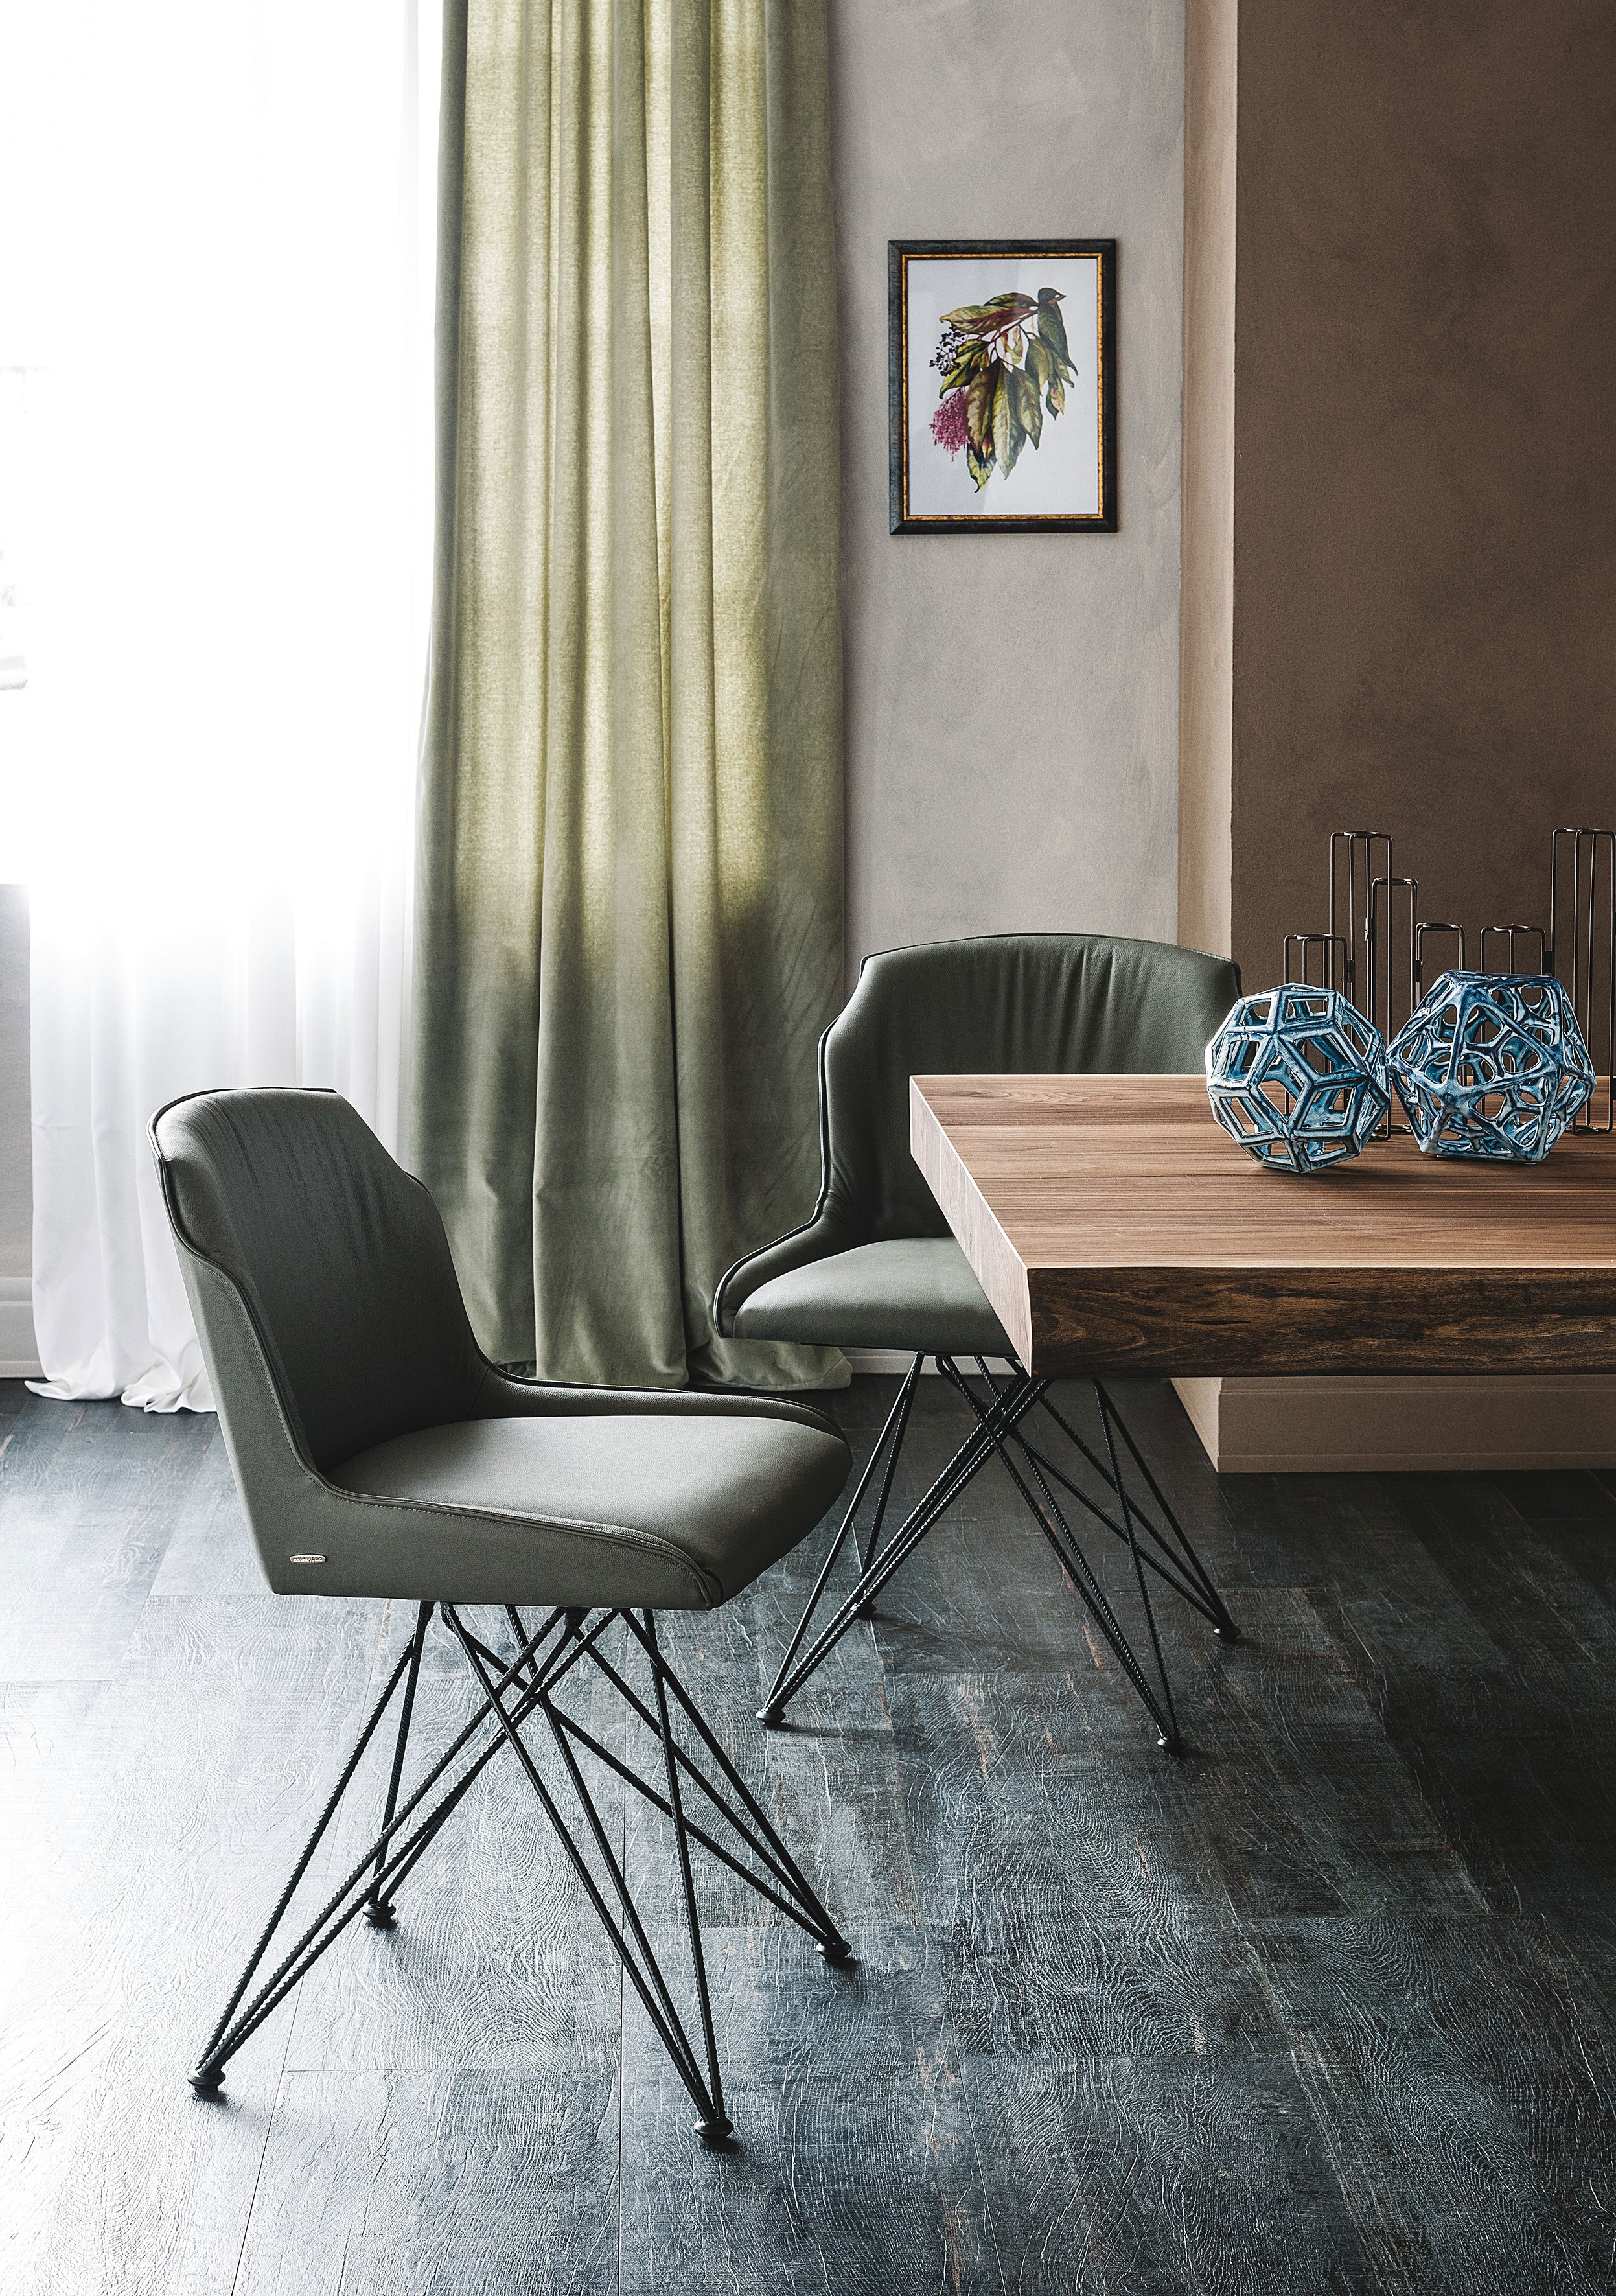 Cattelan Italia Flaminia Swiveling Chair With Or Without Arms